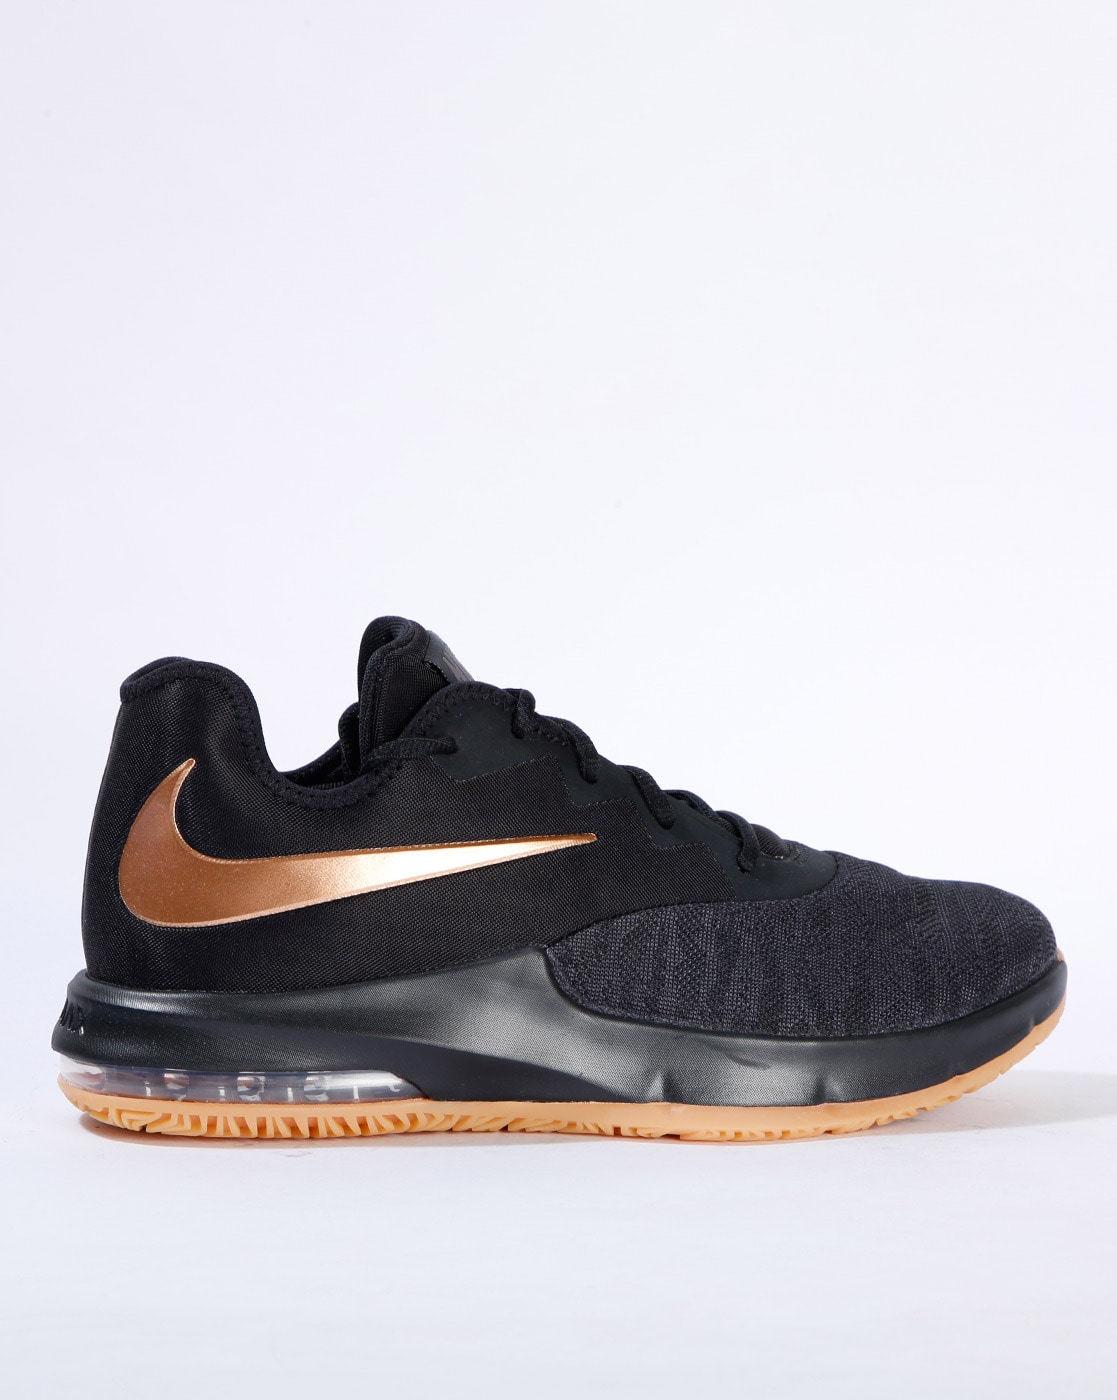 nike black and gold sneakers